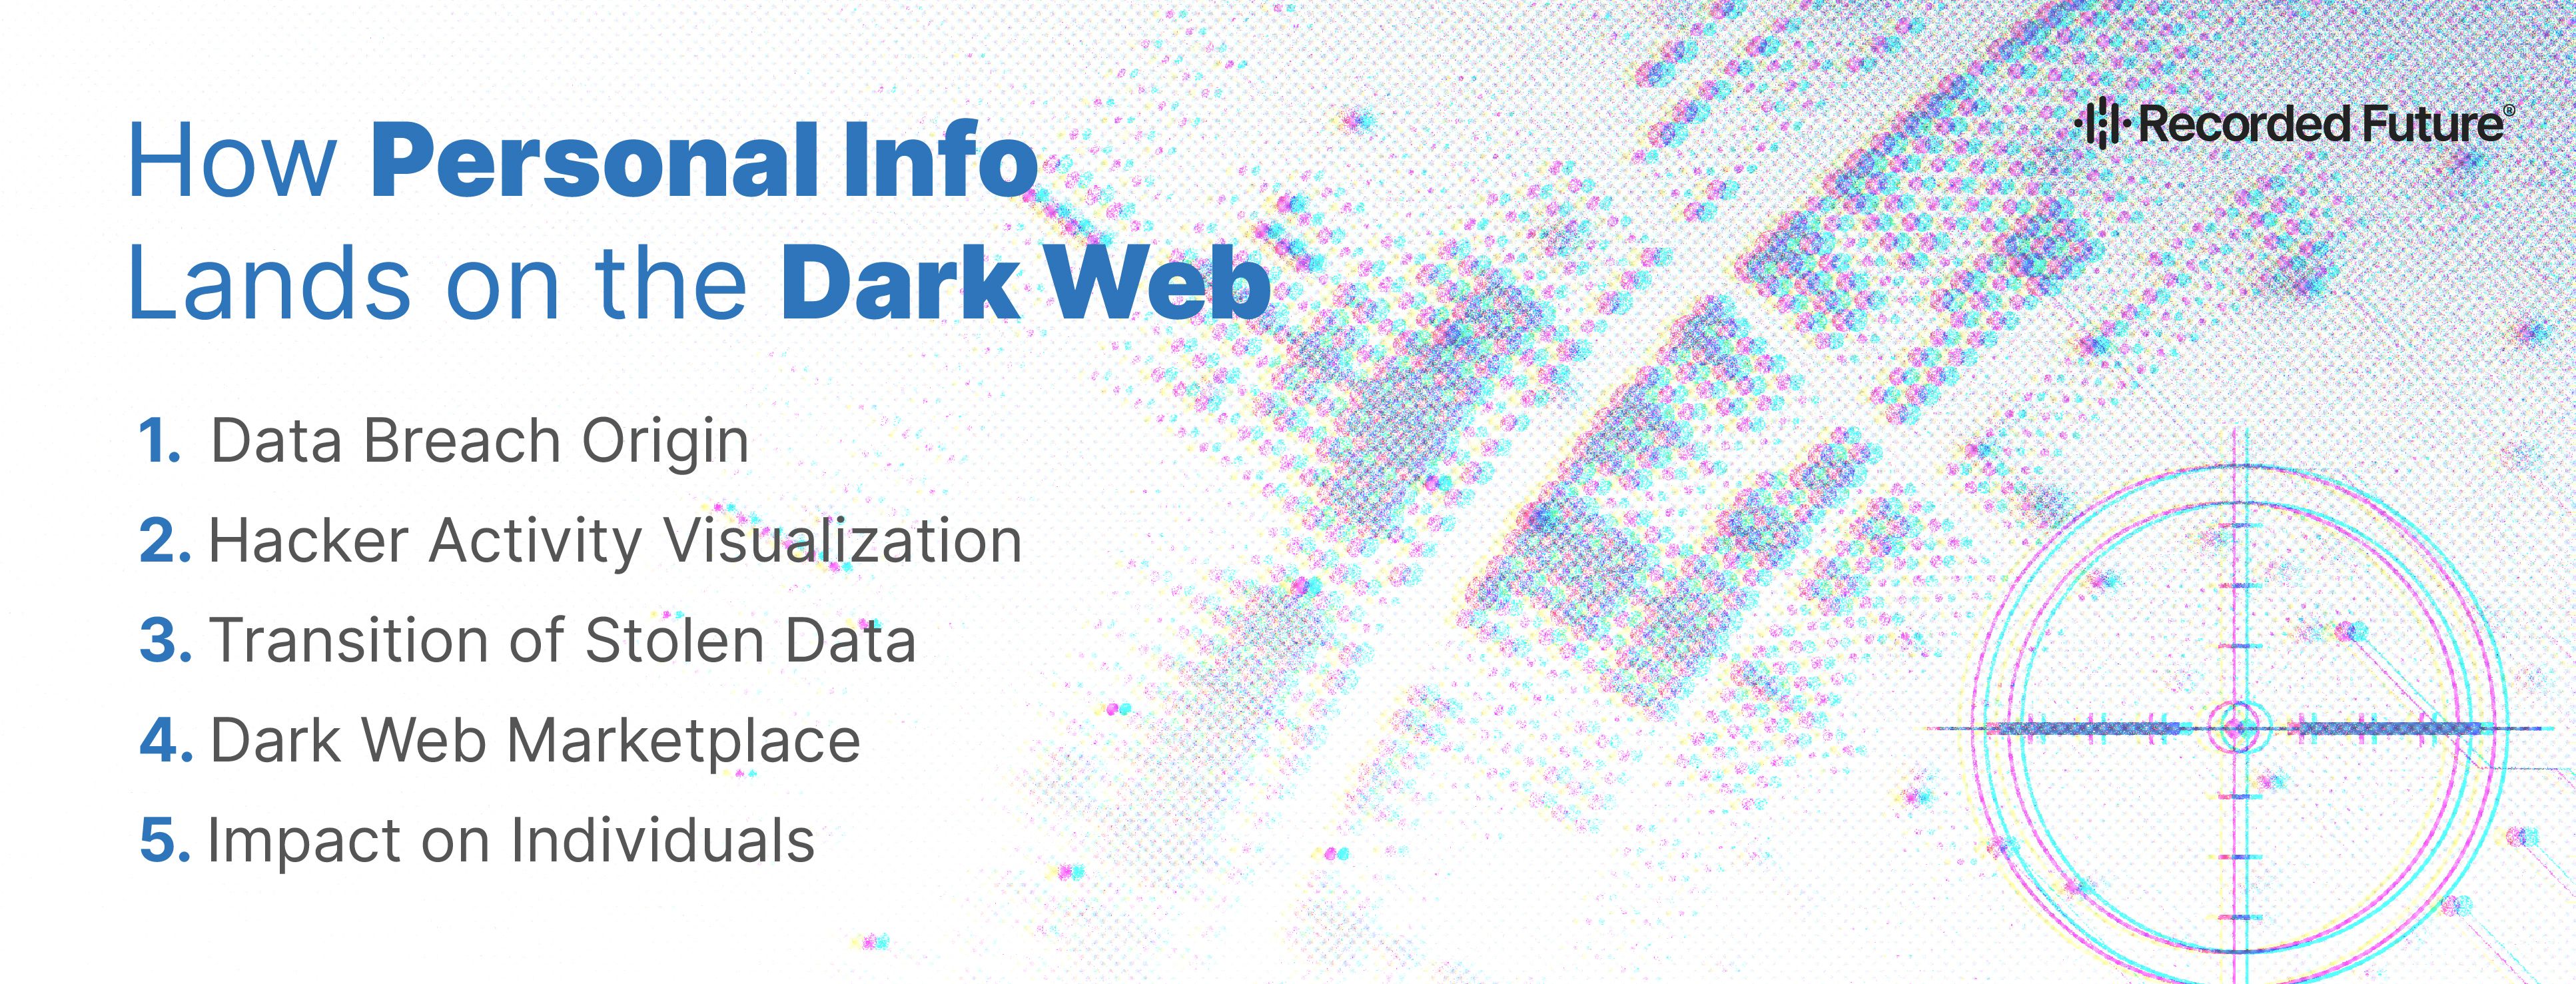 How Personal Info Lands on the Dark Web